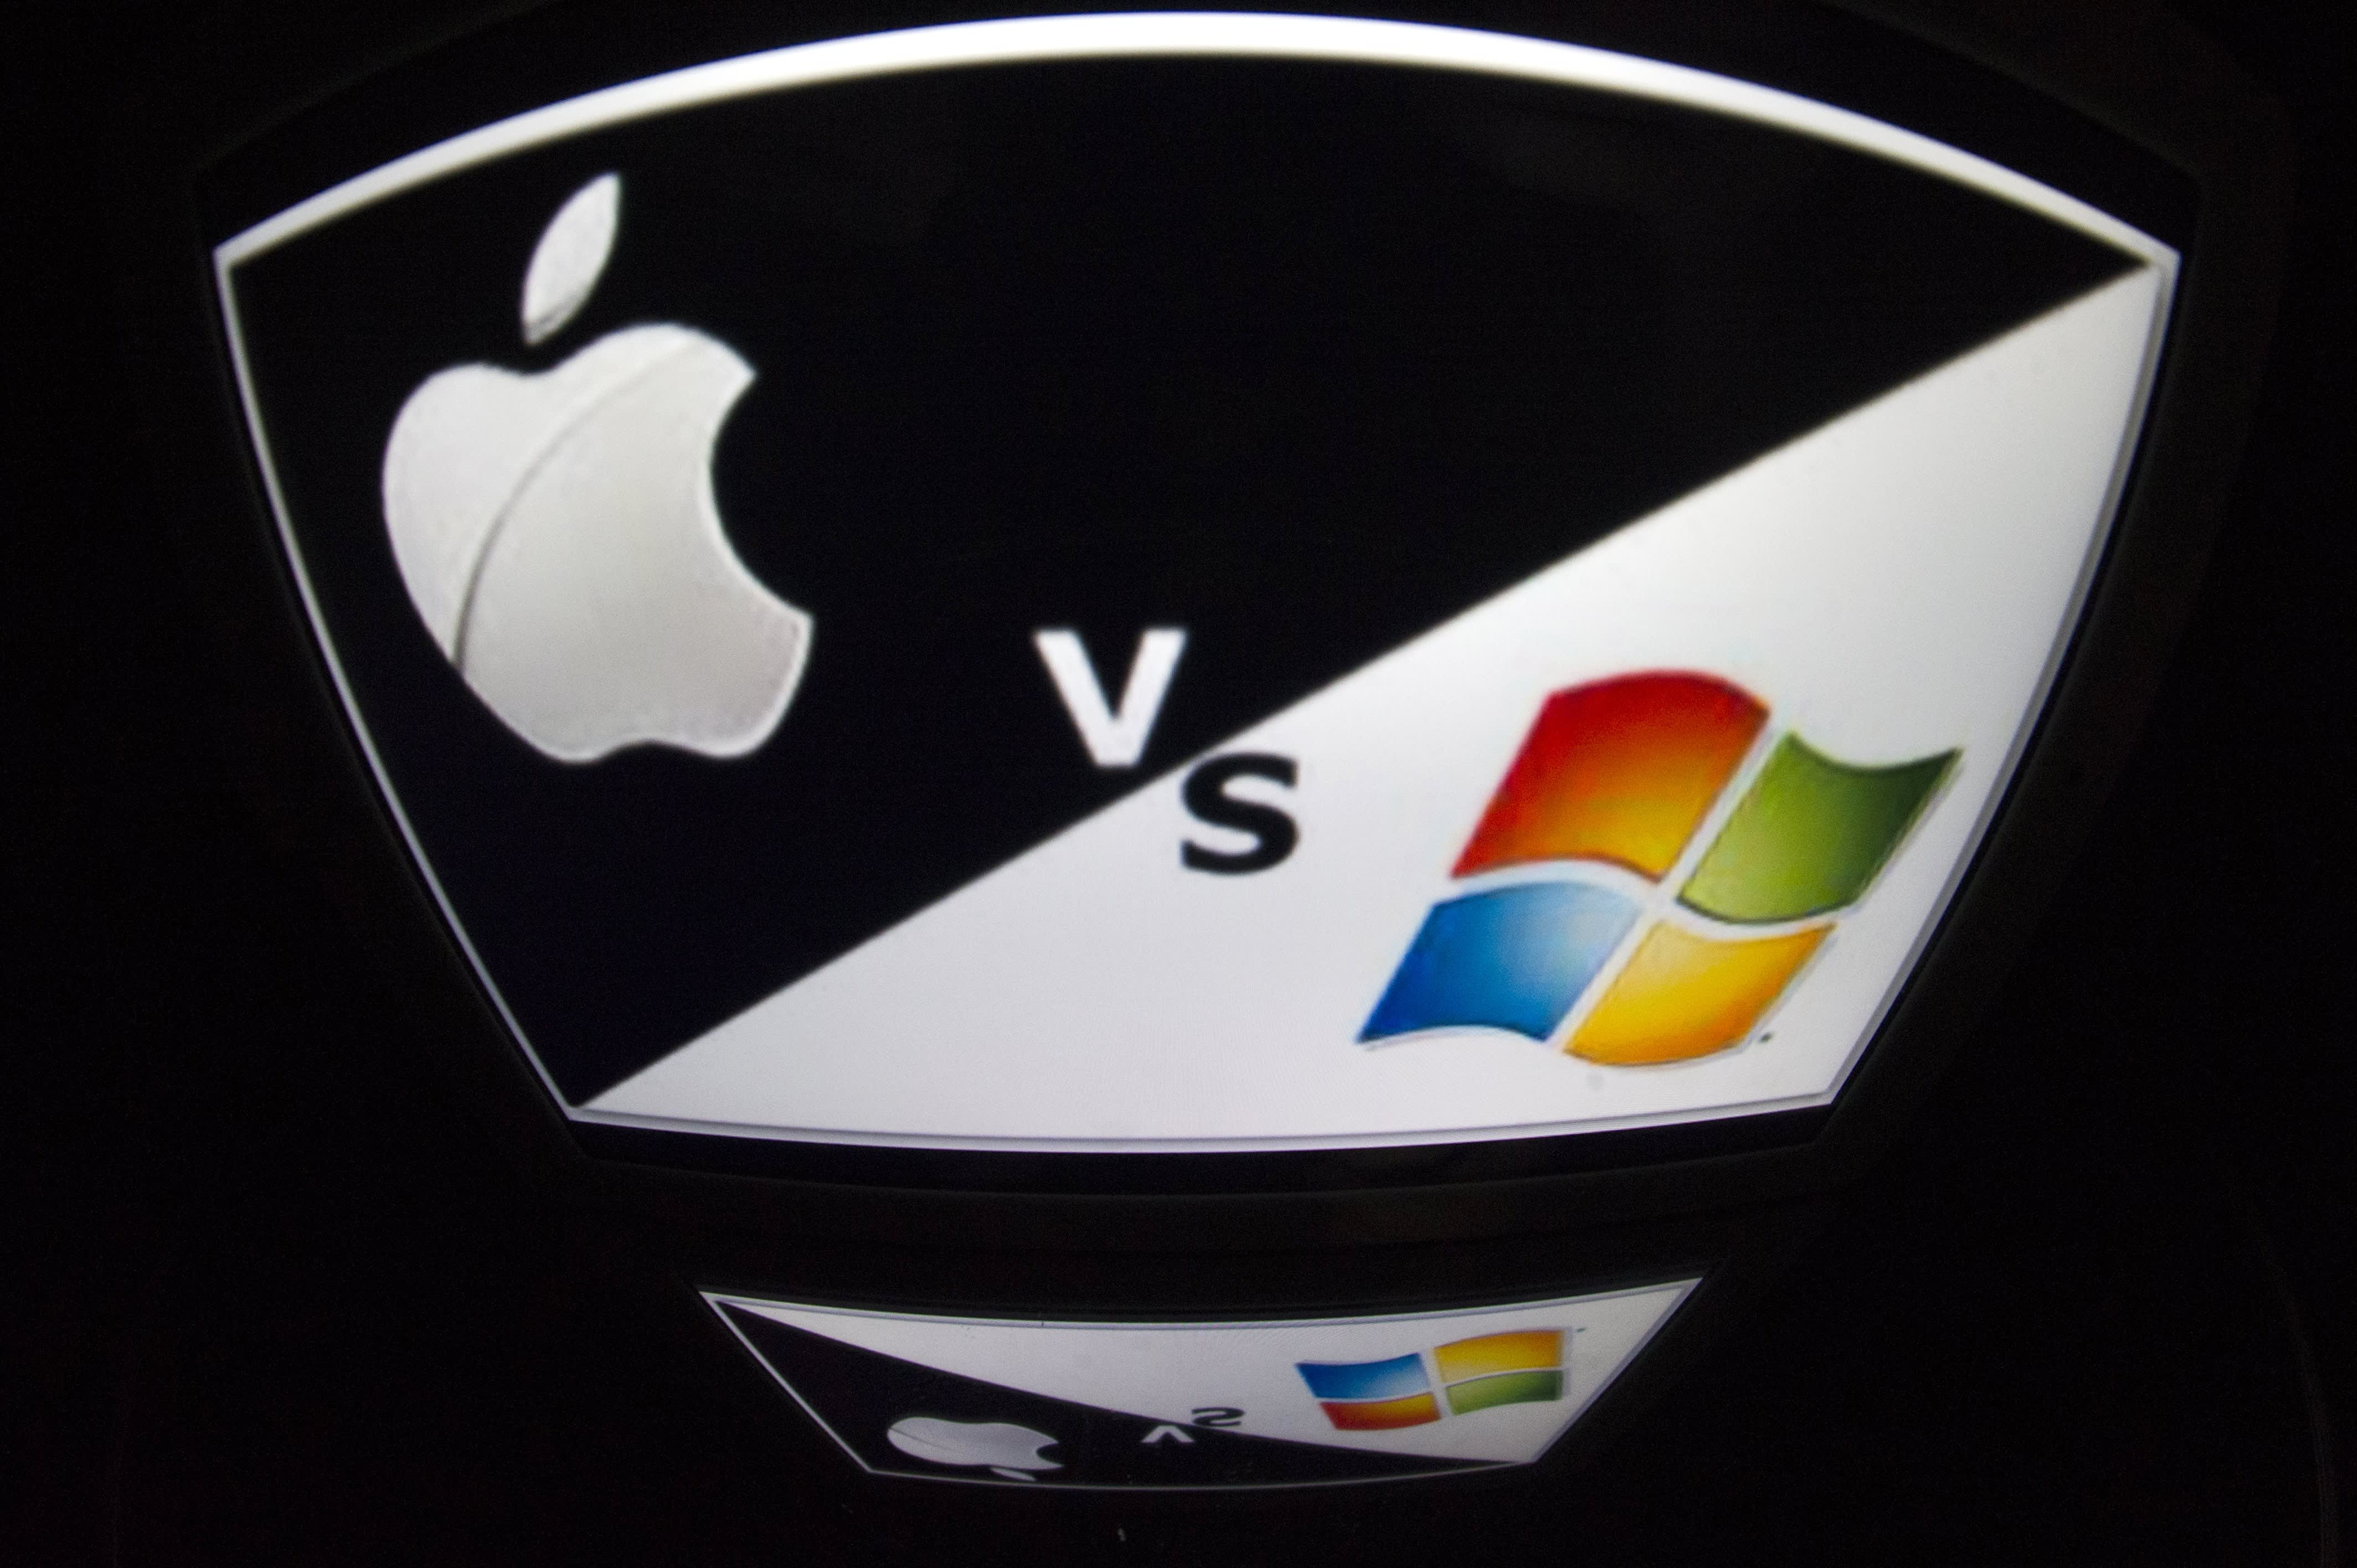 Microsoft portrays itself as the anti-Apple: ‘The world needs a more open platform’